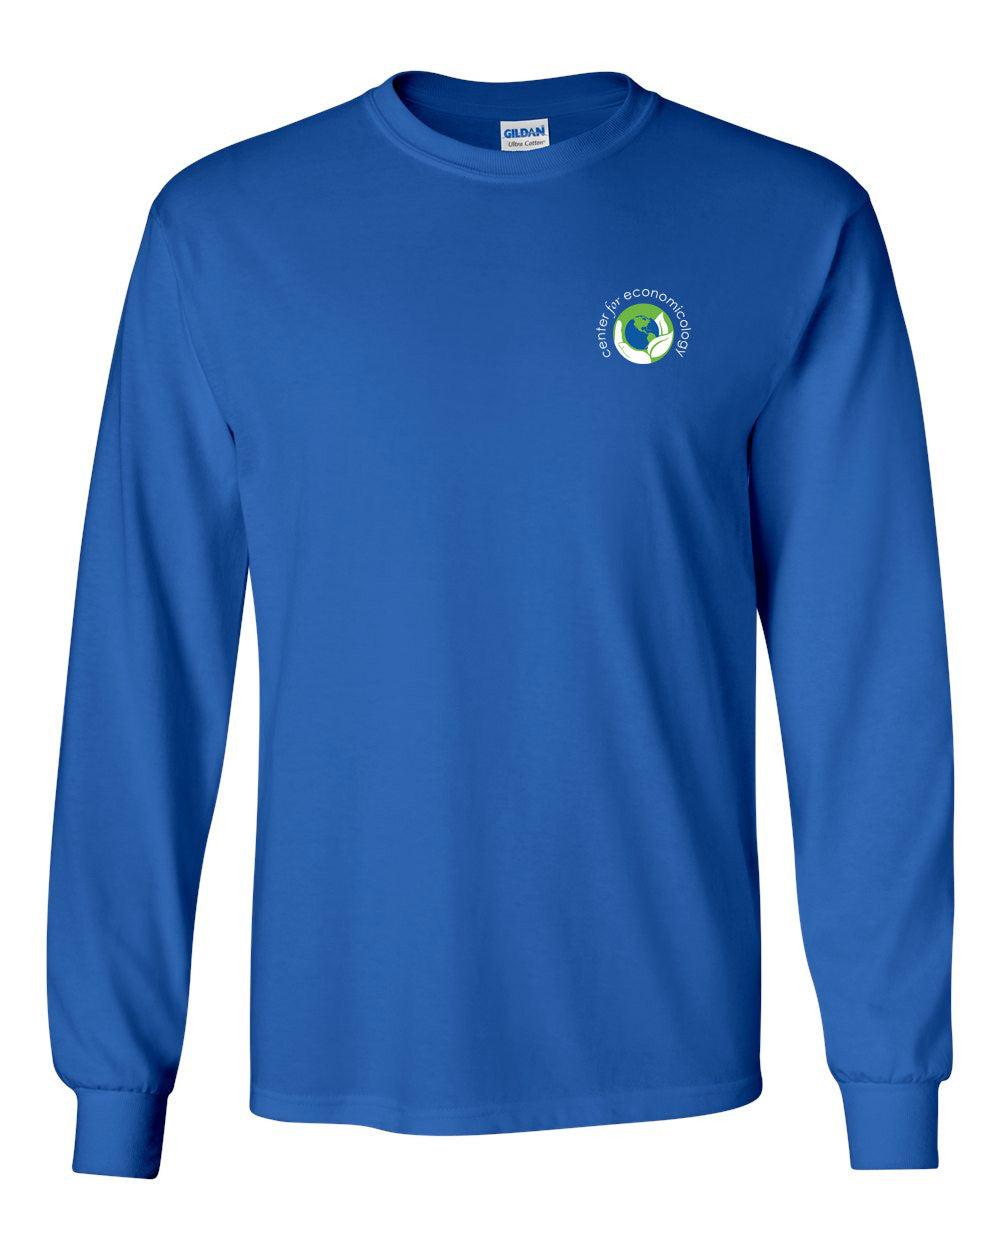 Center for Economicology Long Sleeve Tee